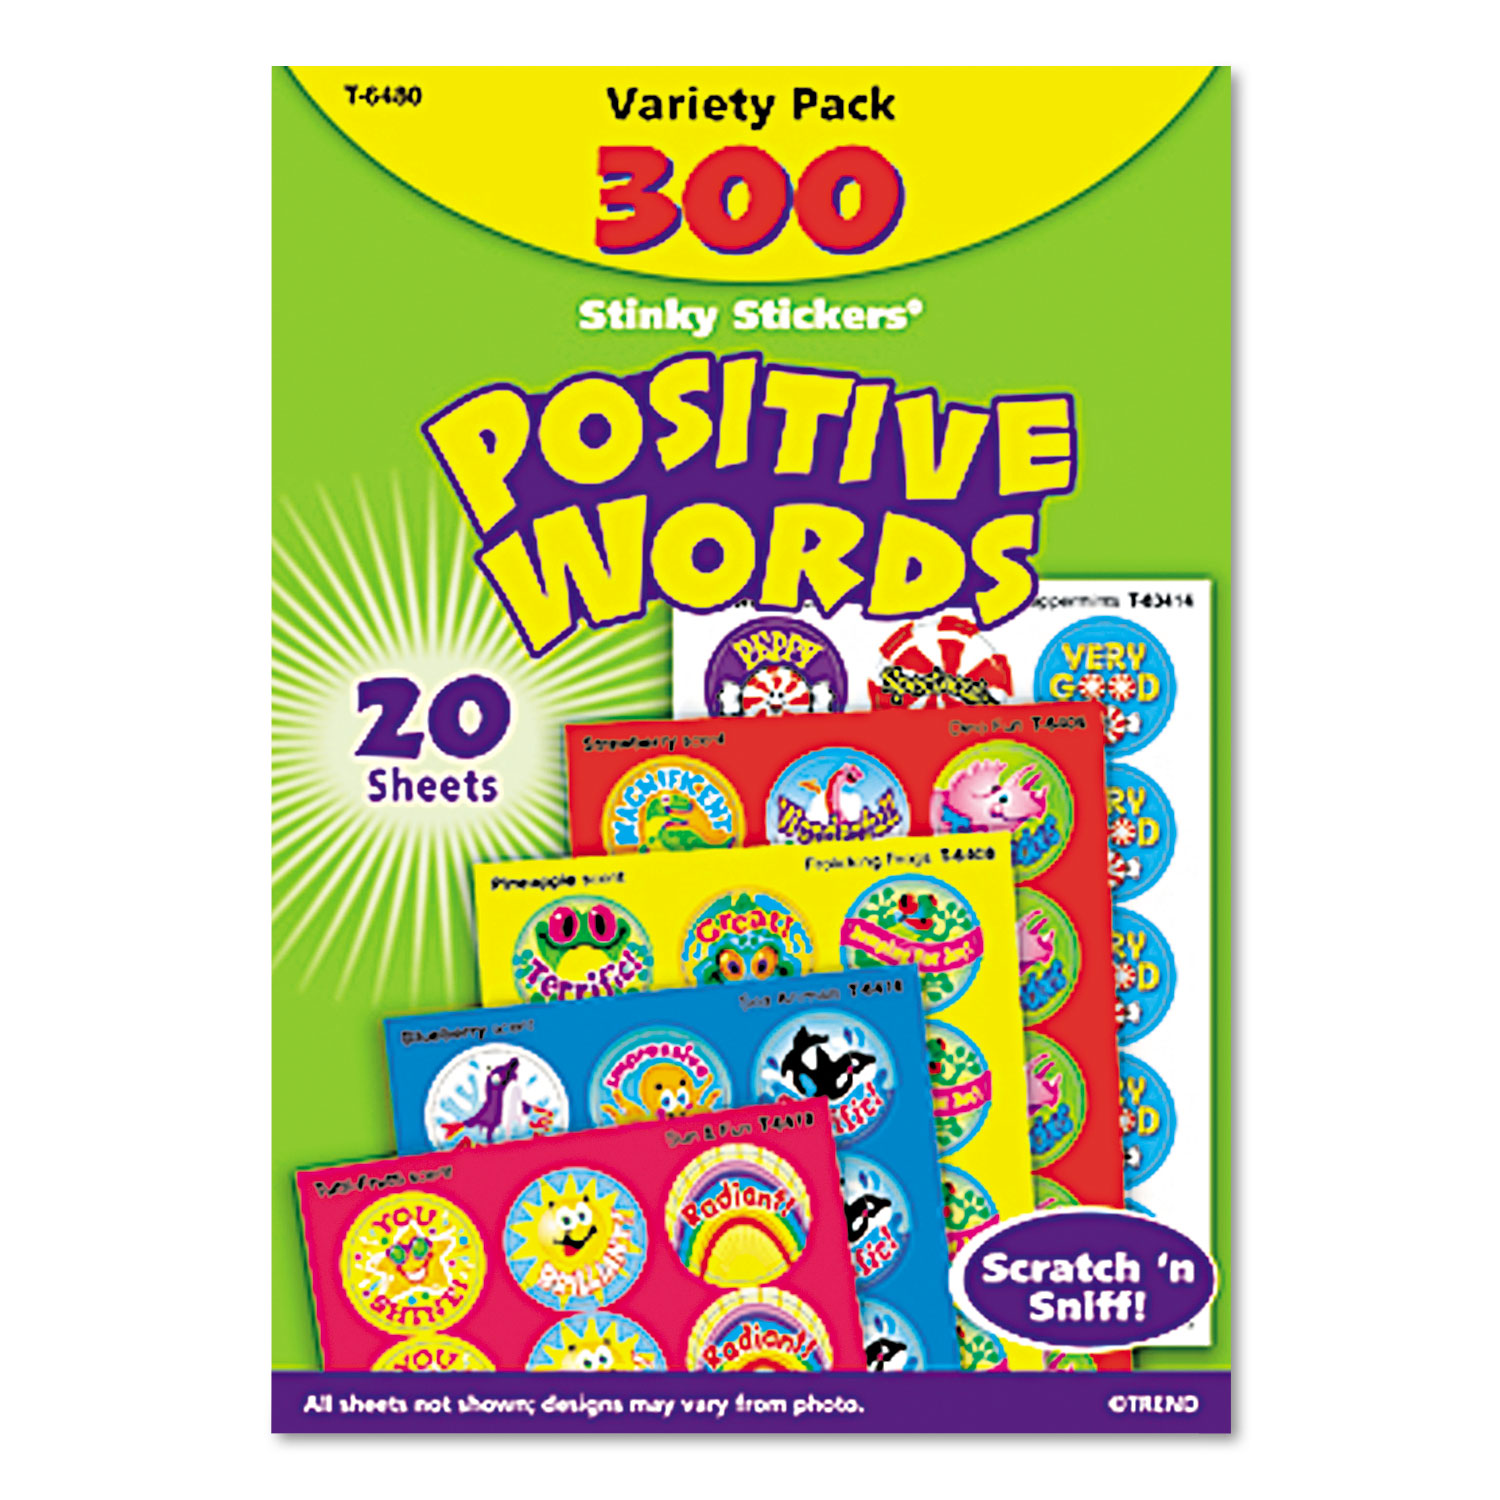 Stinky Stickers Variety Pack, Positive Words, 300/Pack